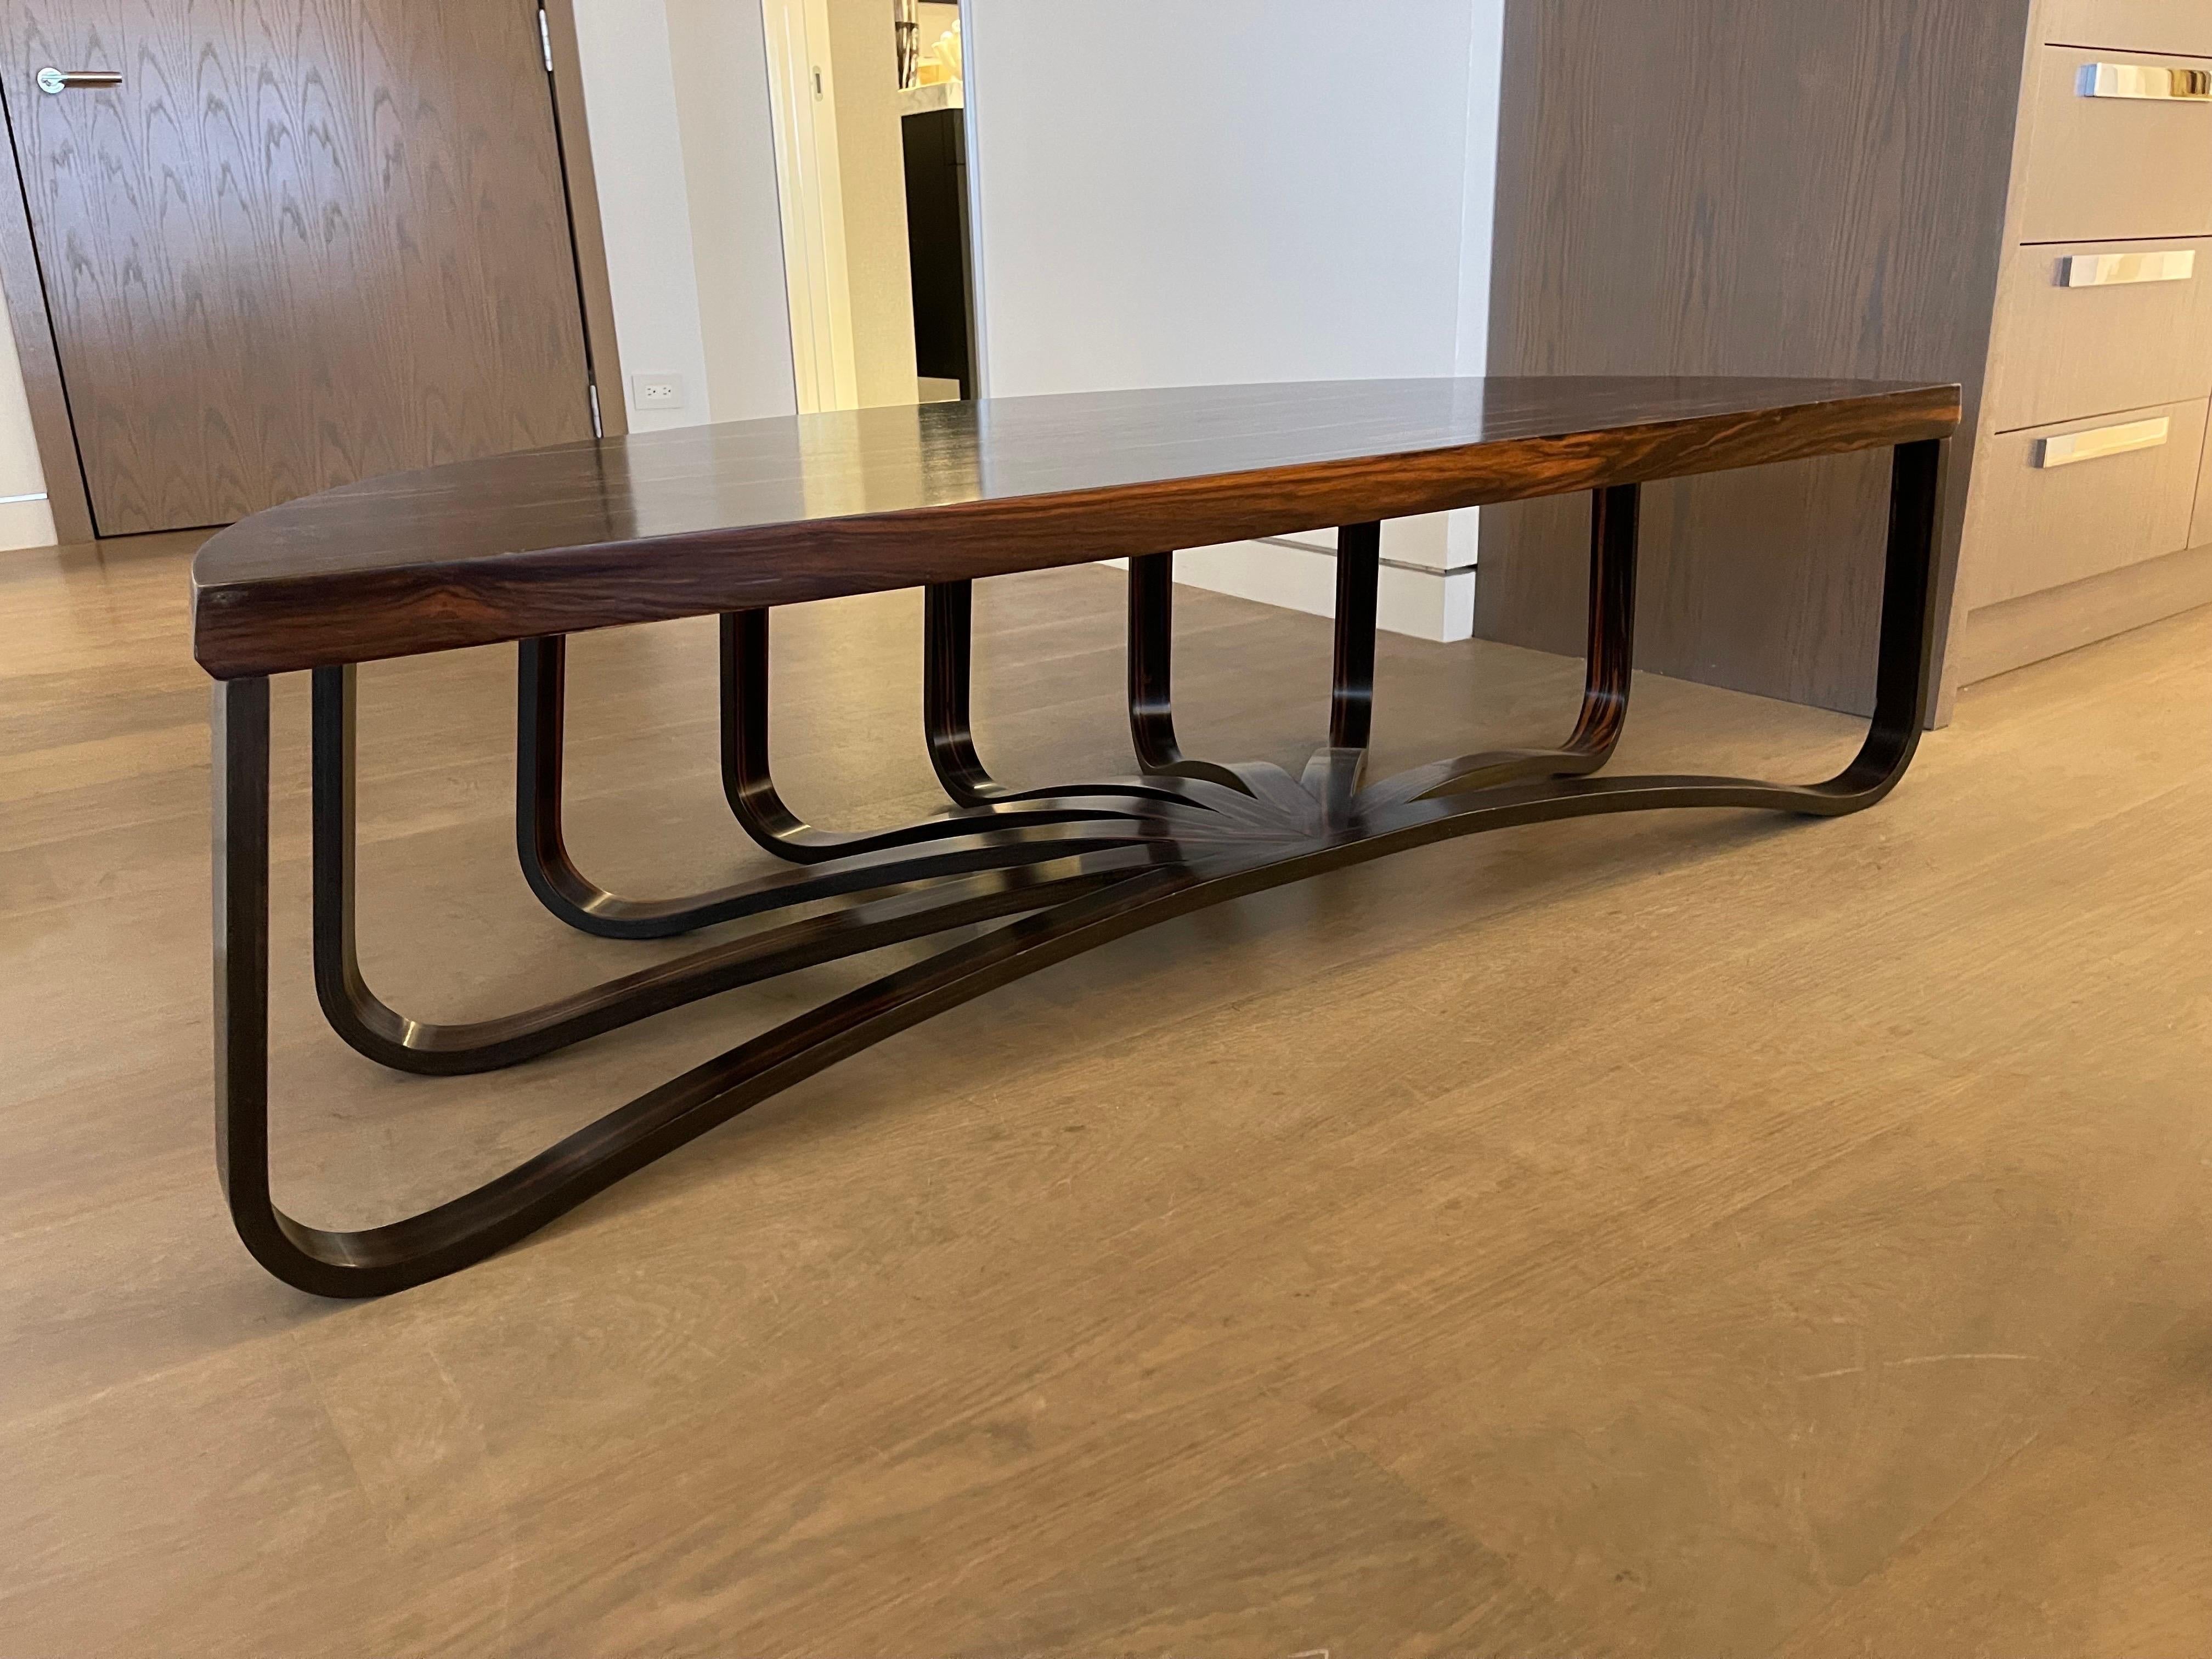 Ralph Rucci Pair of Contemporary Macassar and Walnut Coffee Tables For Sale 8